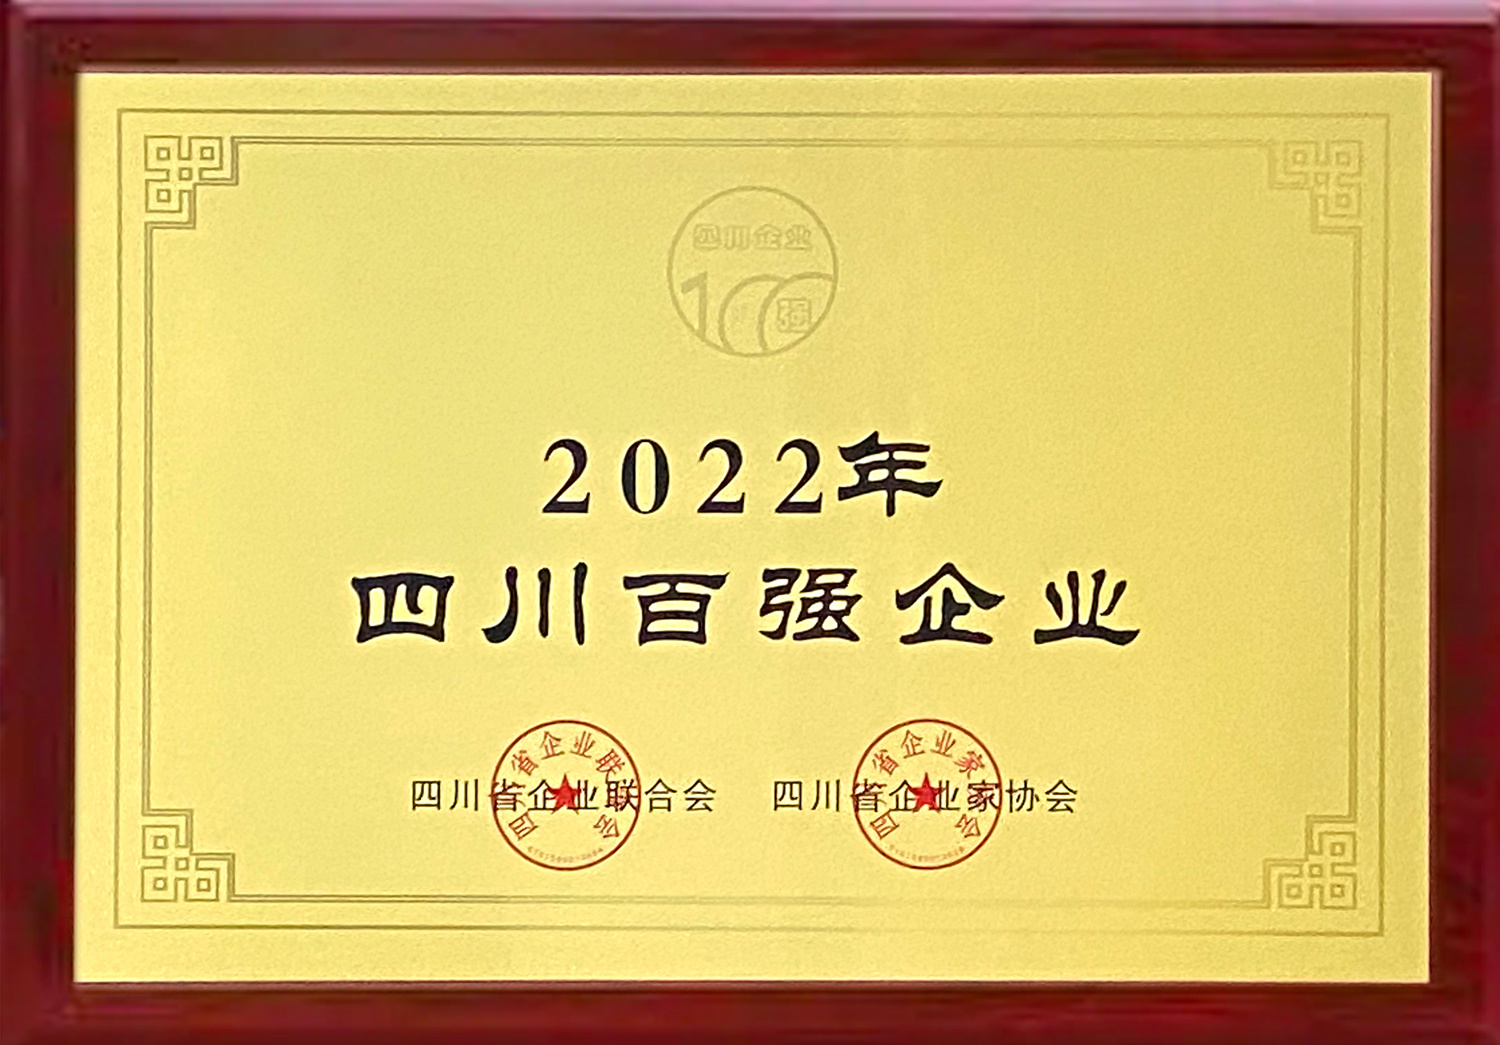 In December 2022, Tianxinyang was awarded the 